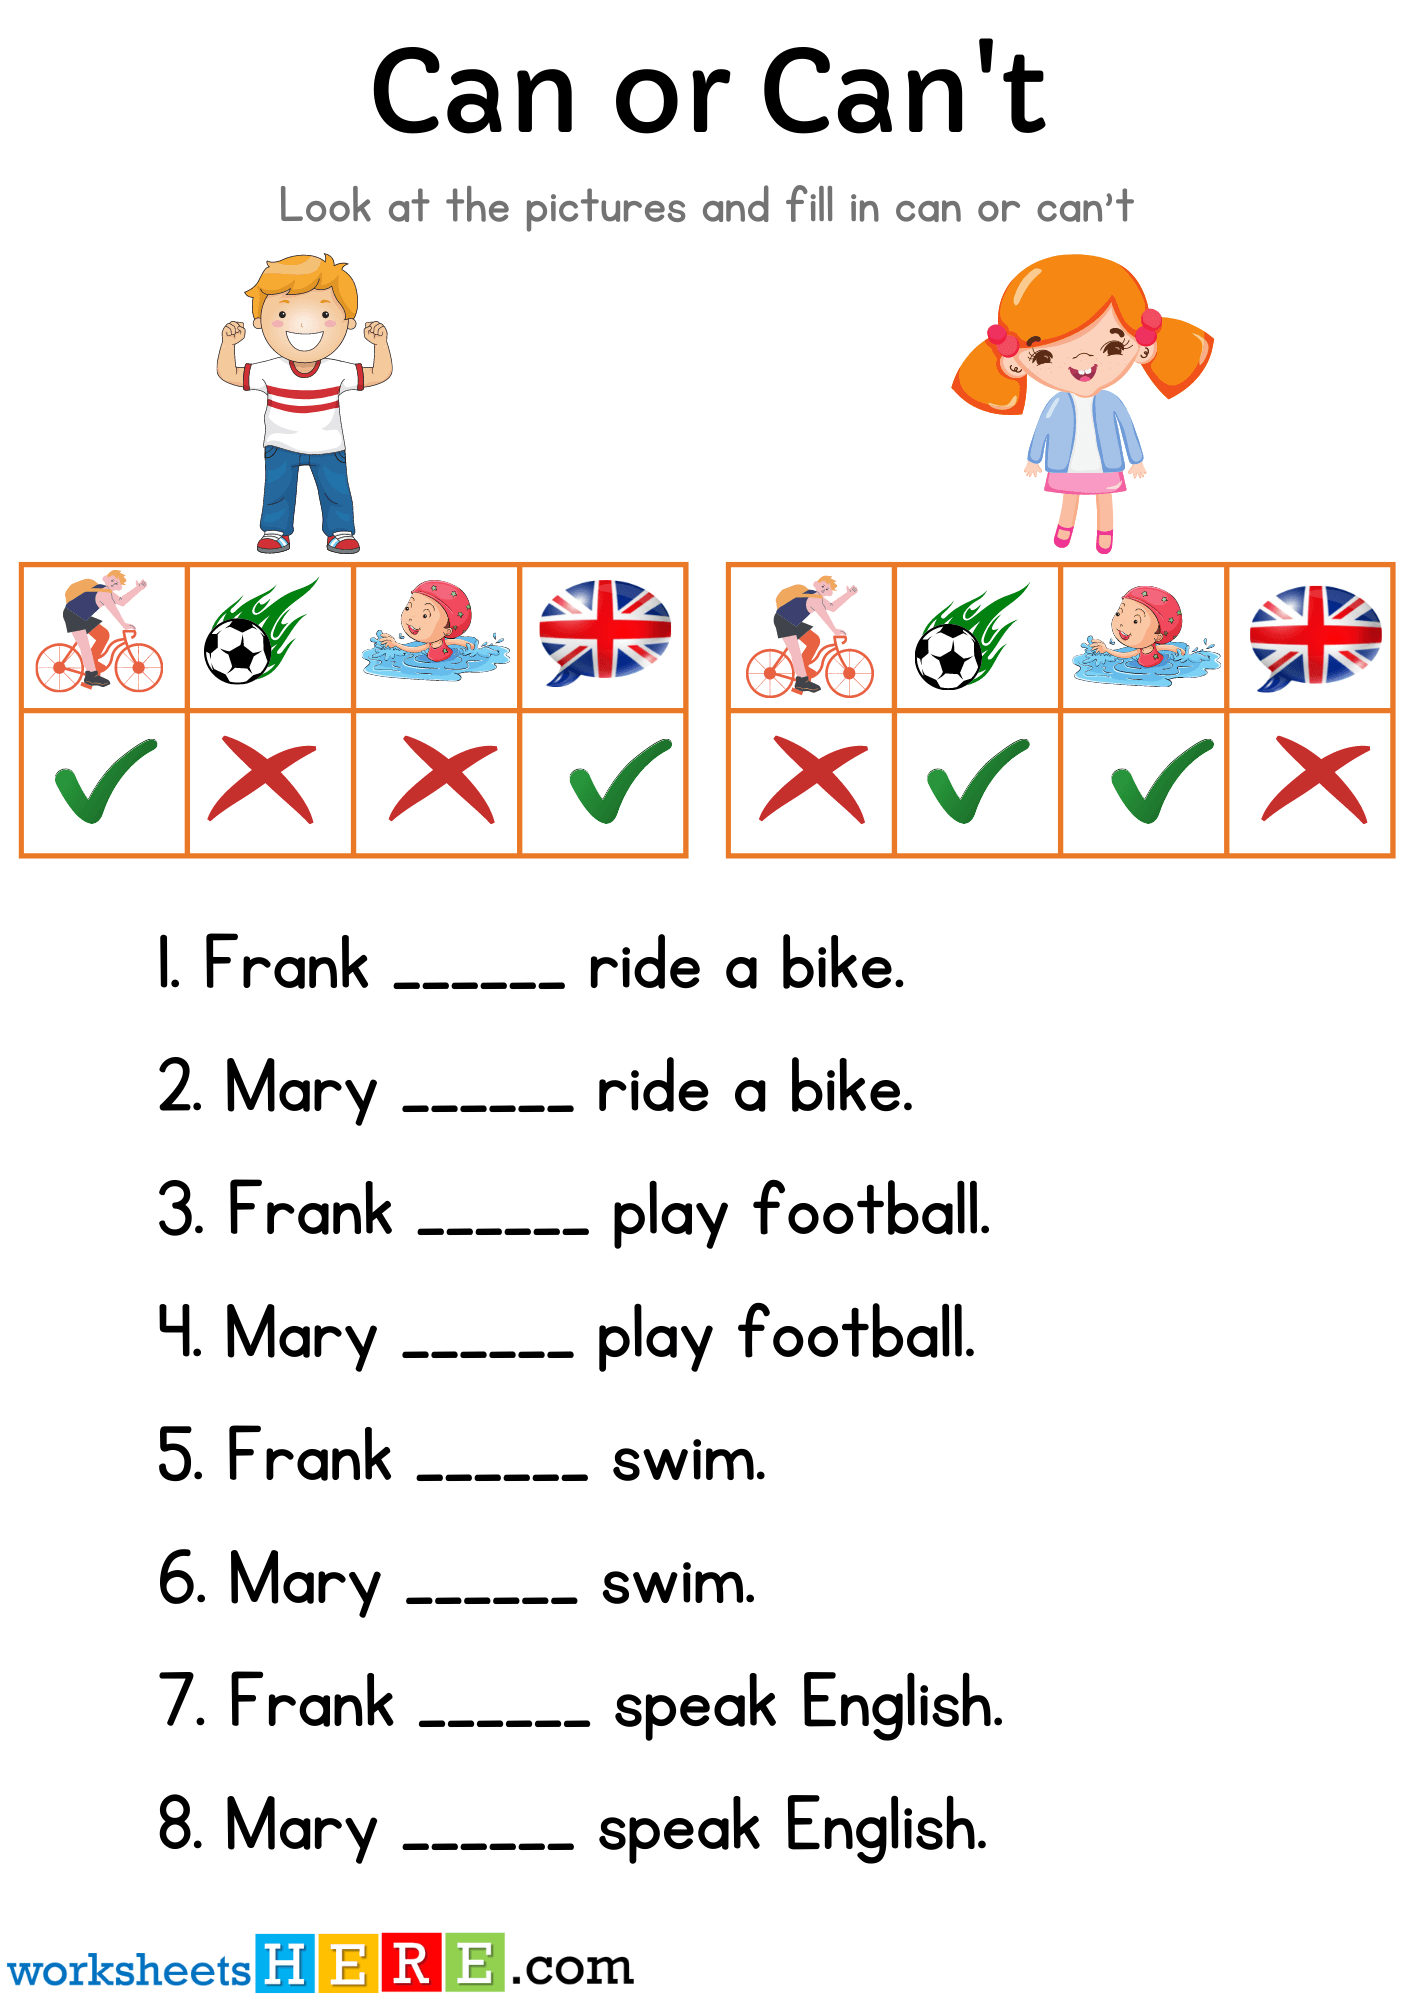 Can or Can’t Exercises and Answers with Pictures Examples PDF Worksheet For Kids